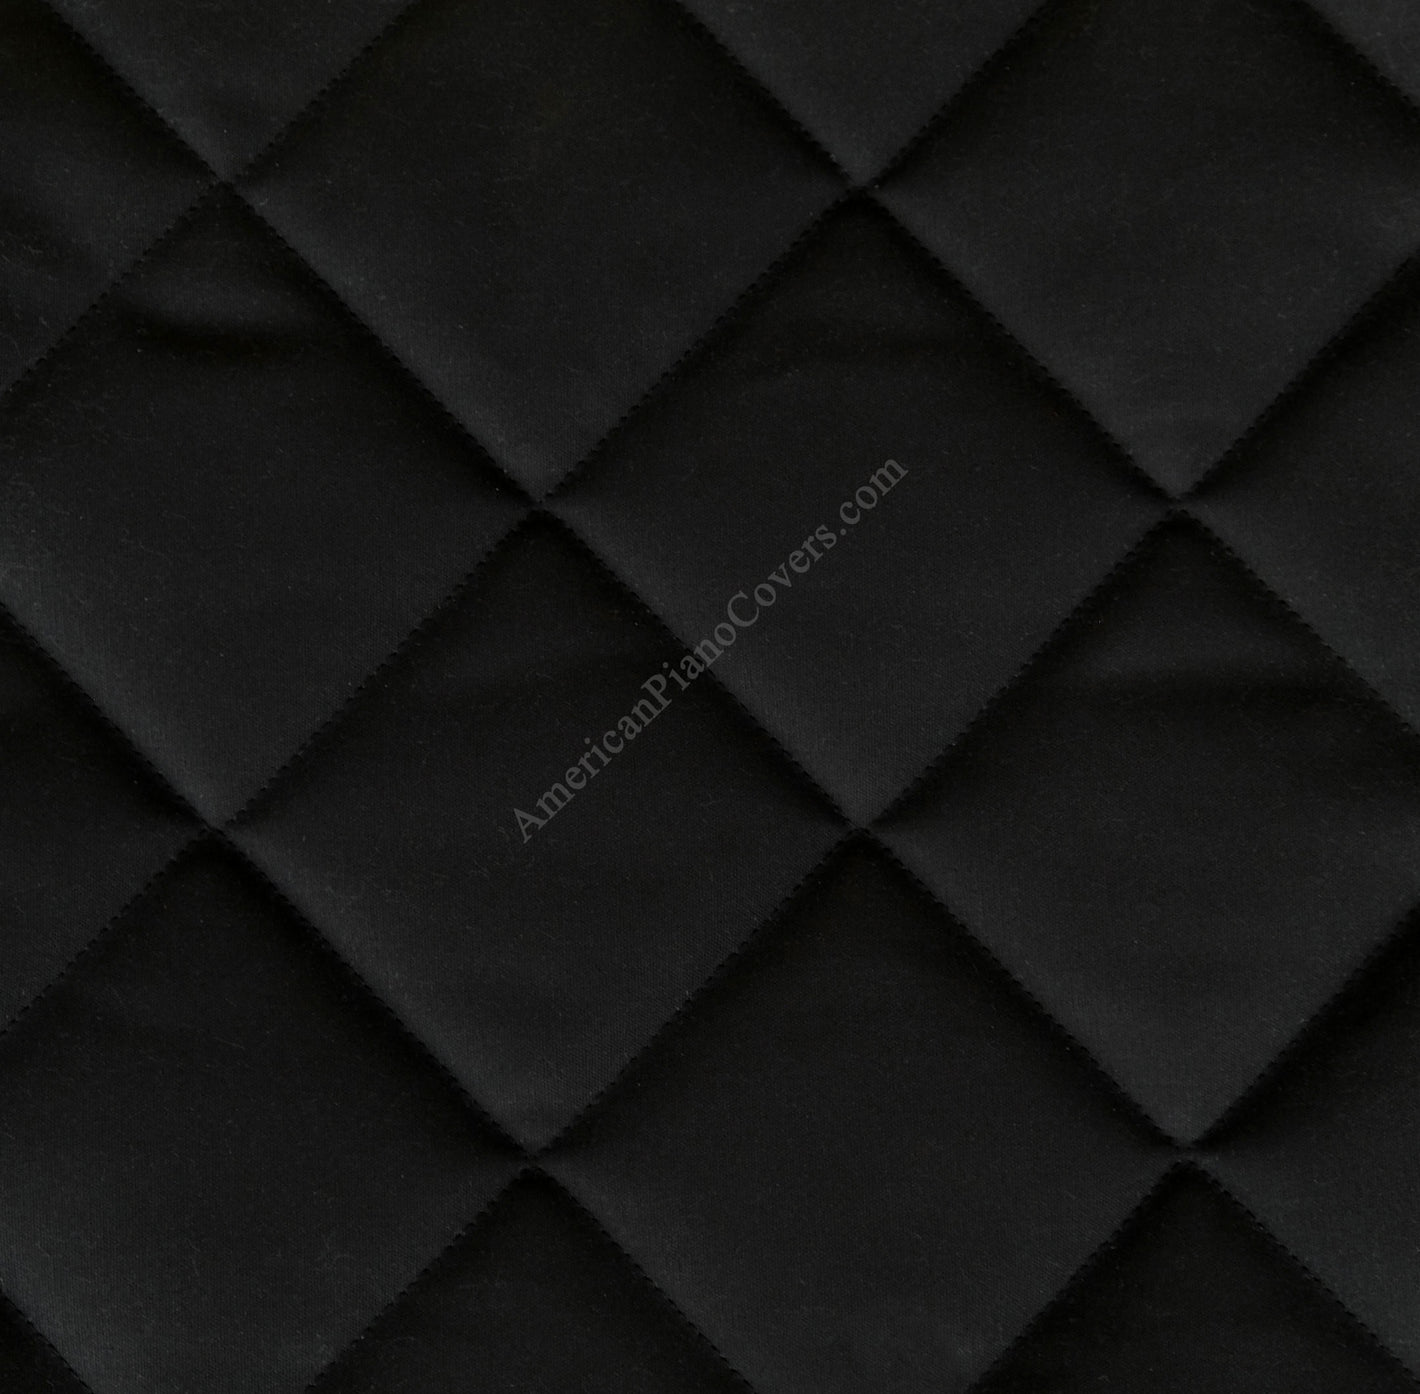 quilted black mackintosh piano cover material